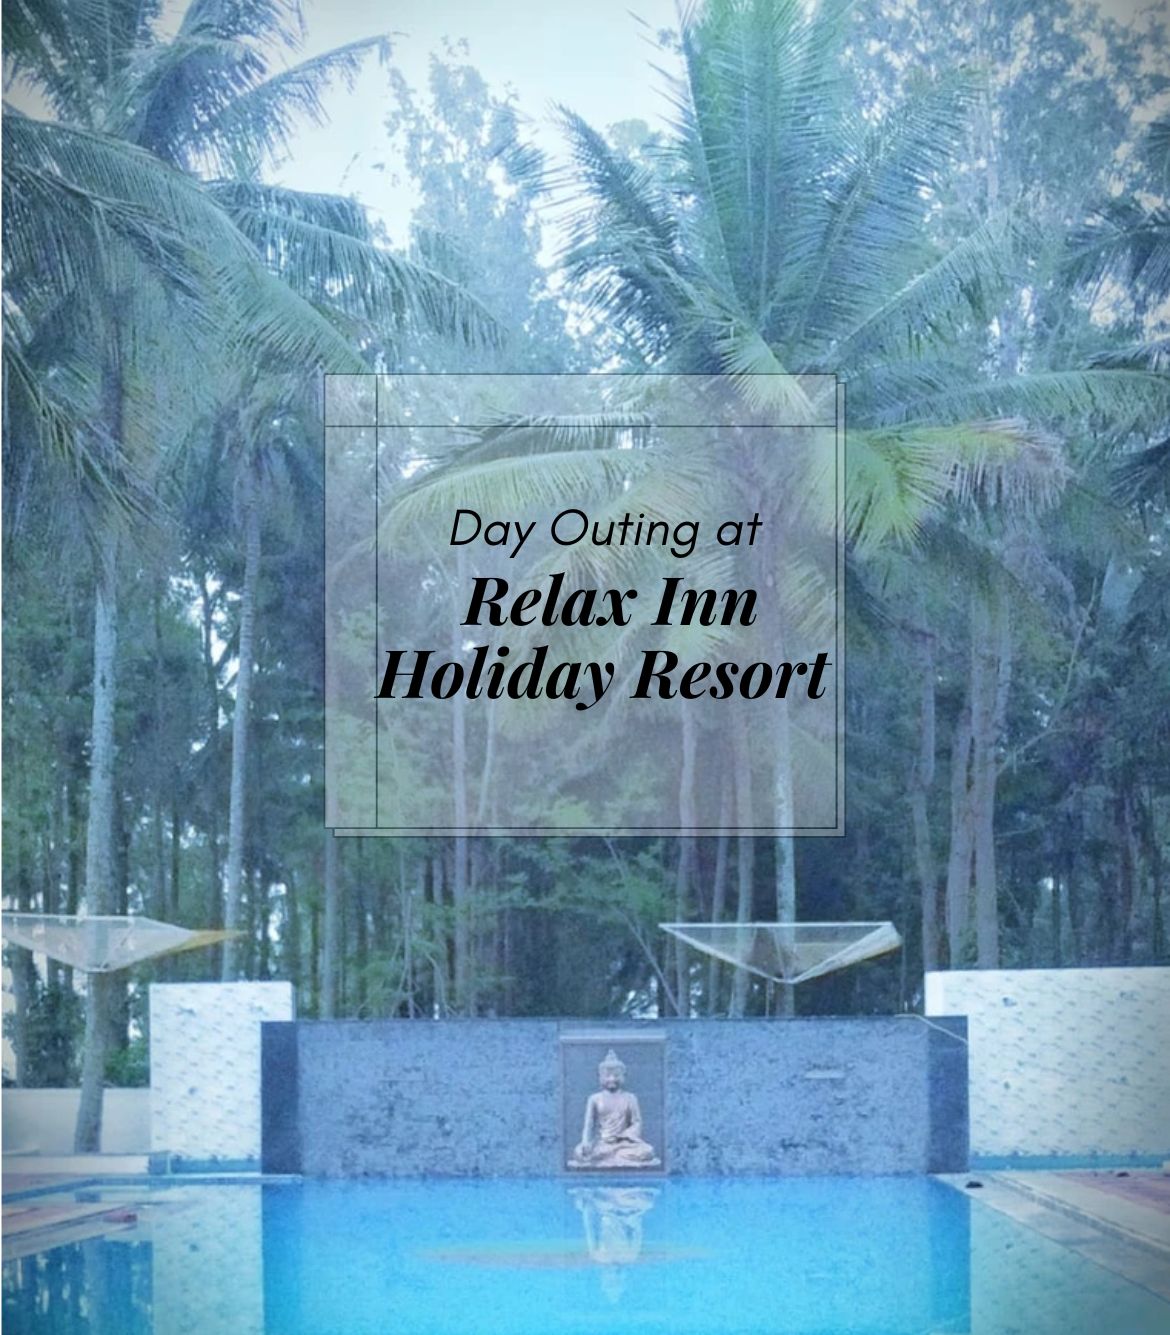 Day Outing at Relax Inn Holiday Resort